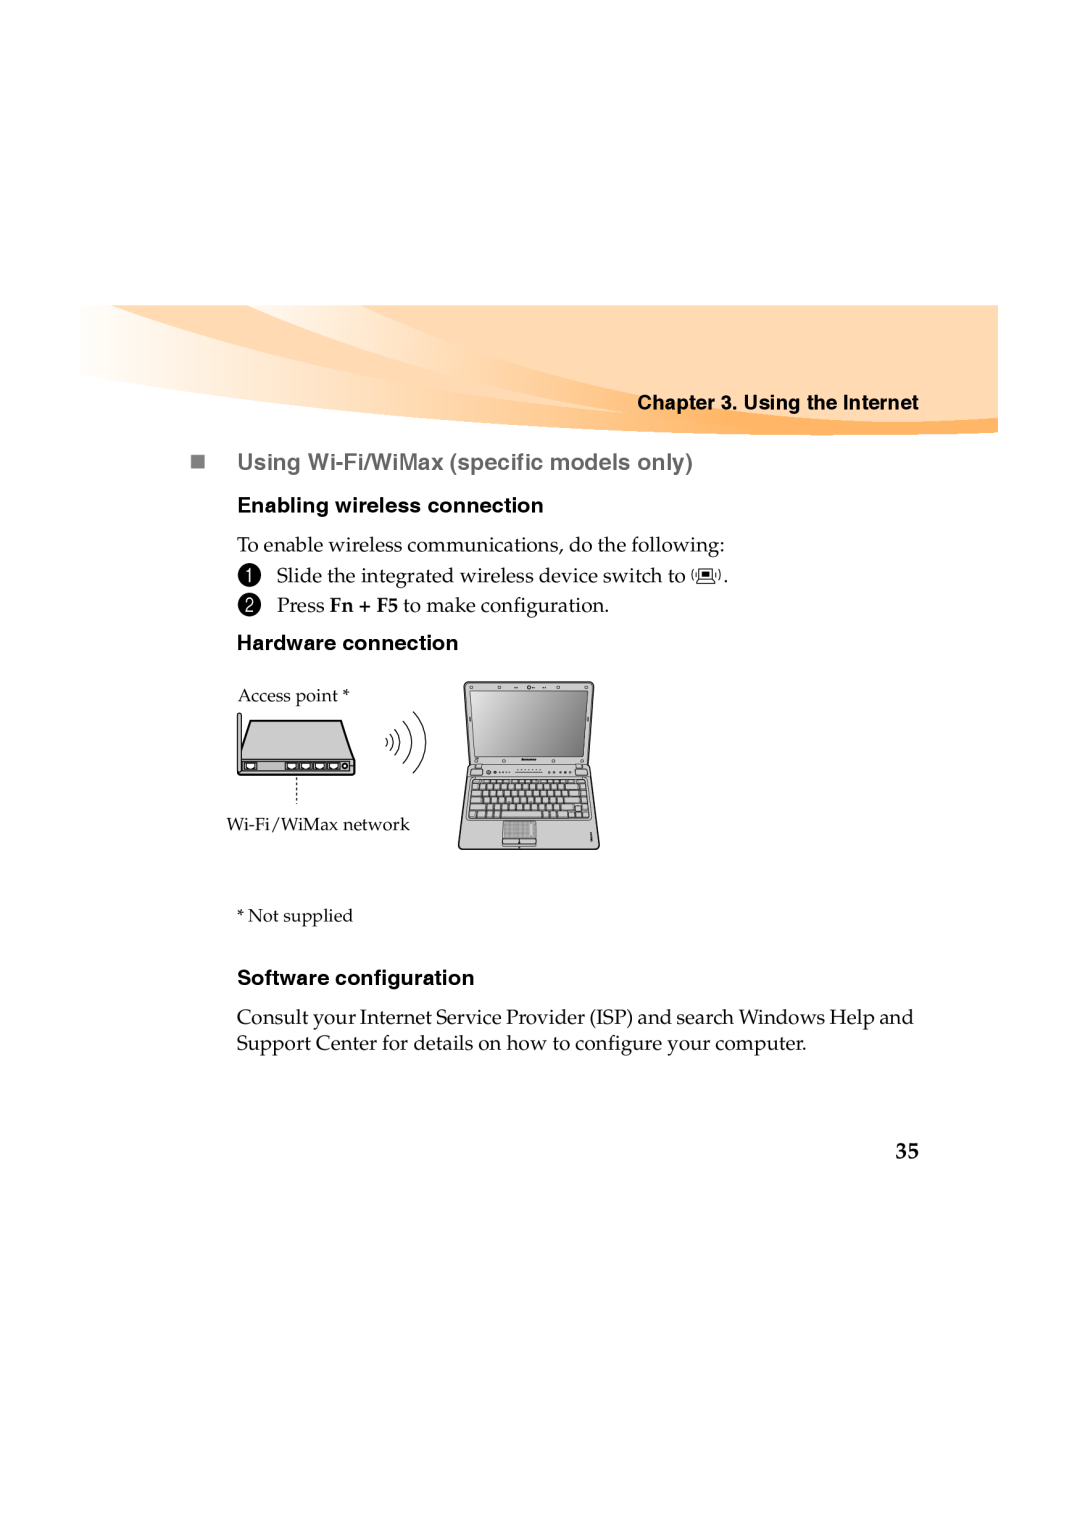 Lenovo Y460 manual „ Using Wi-Fi/WiMax specific models only, Using the Internet, Enabling wireless connection 